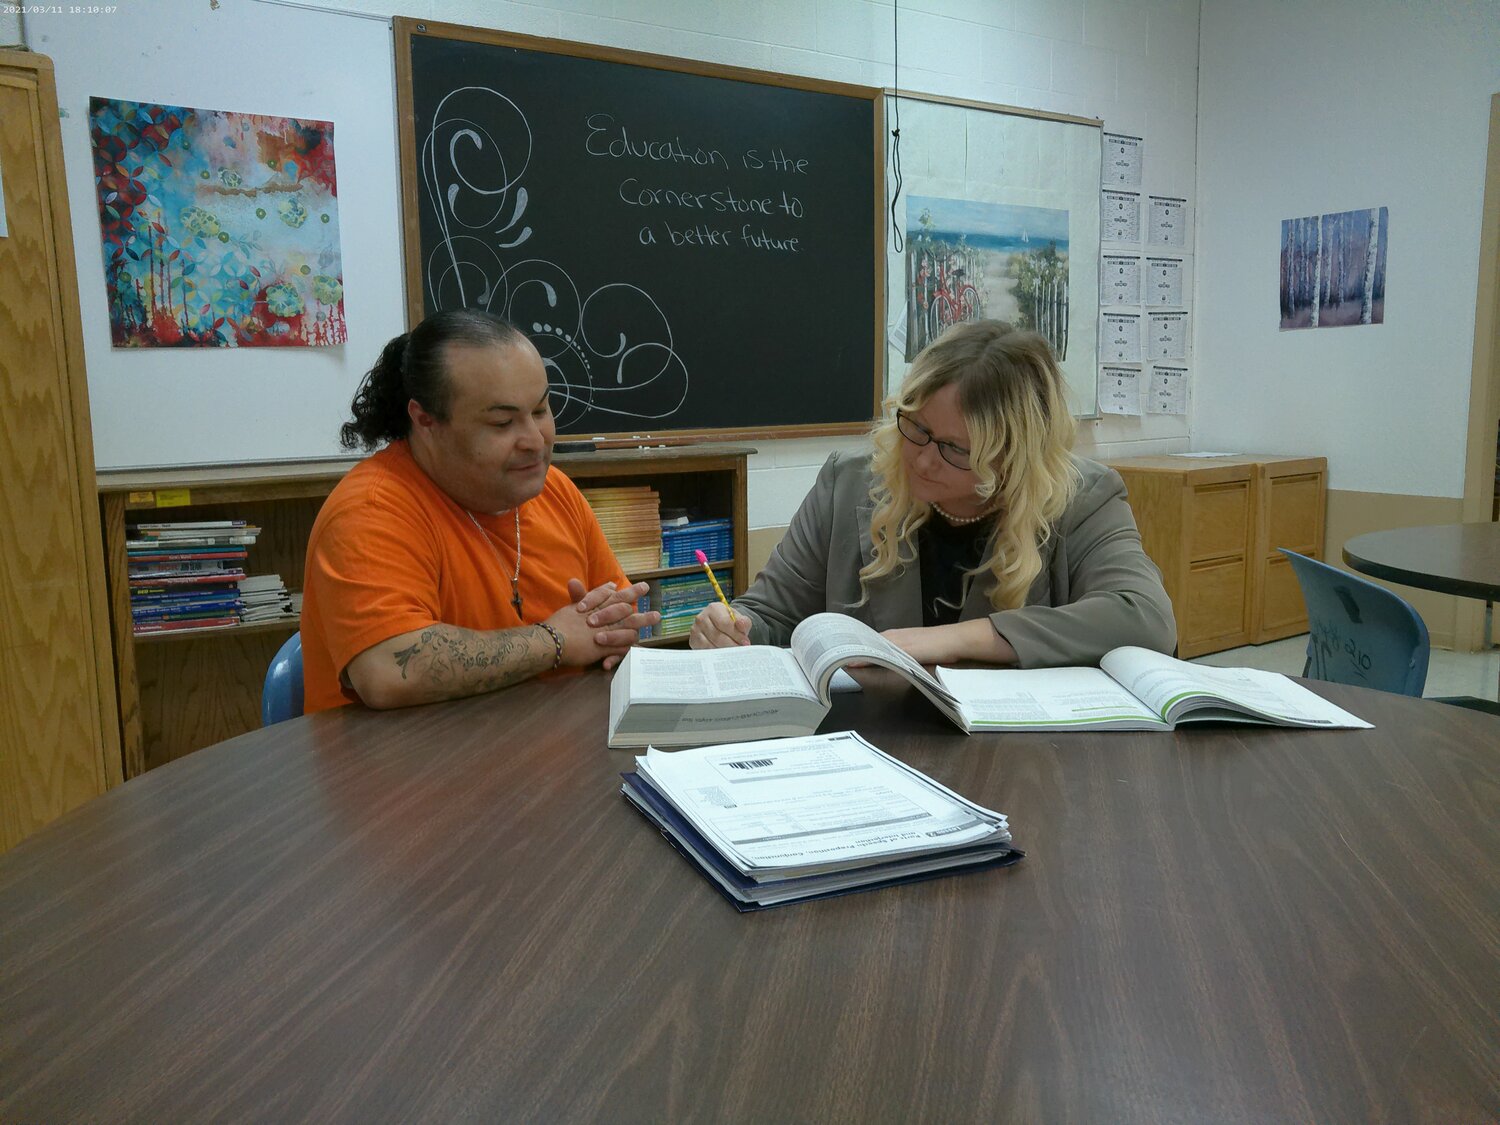 The education program at the Southern New Mexico Correctional Facility west of Las Cruces helps inmates learn a variety of subjects, from language to computer skills.